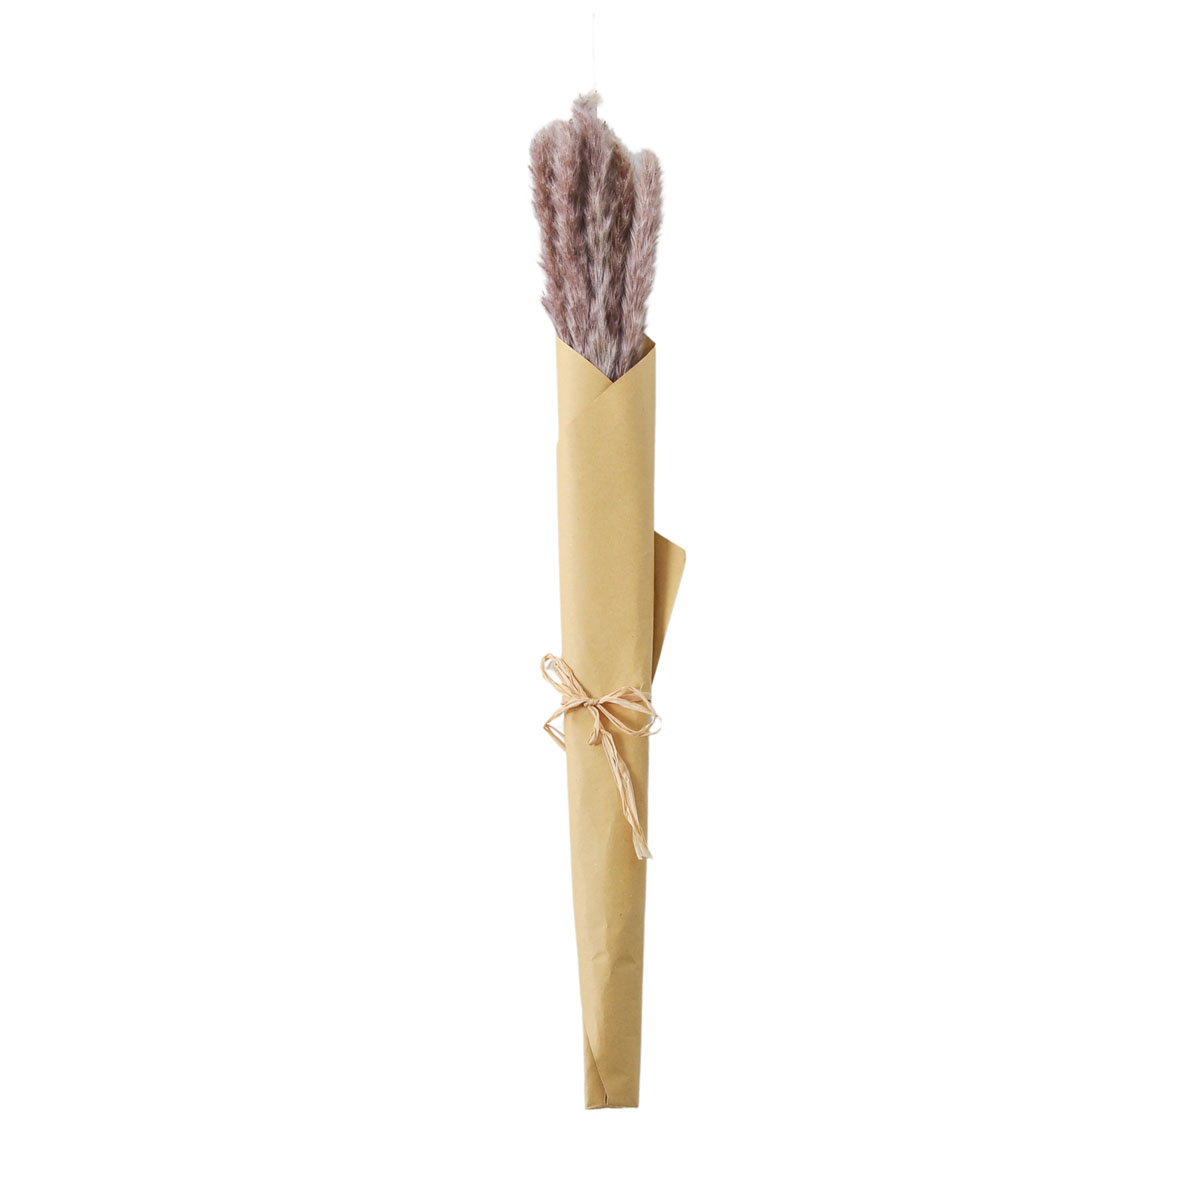 Dried Reed Grass Bundle in Paper Wrap Lilac H600mm